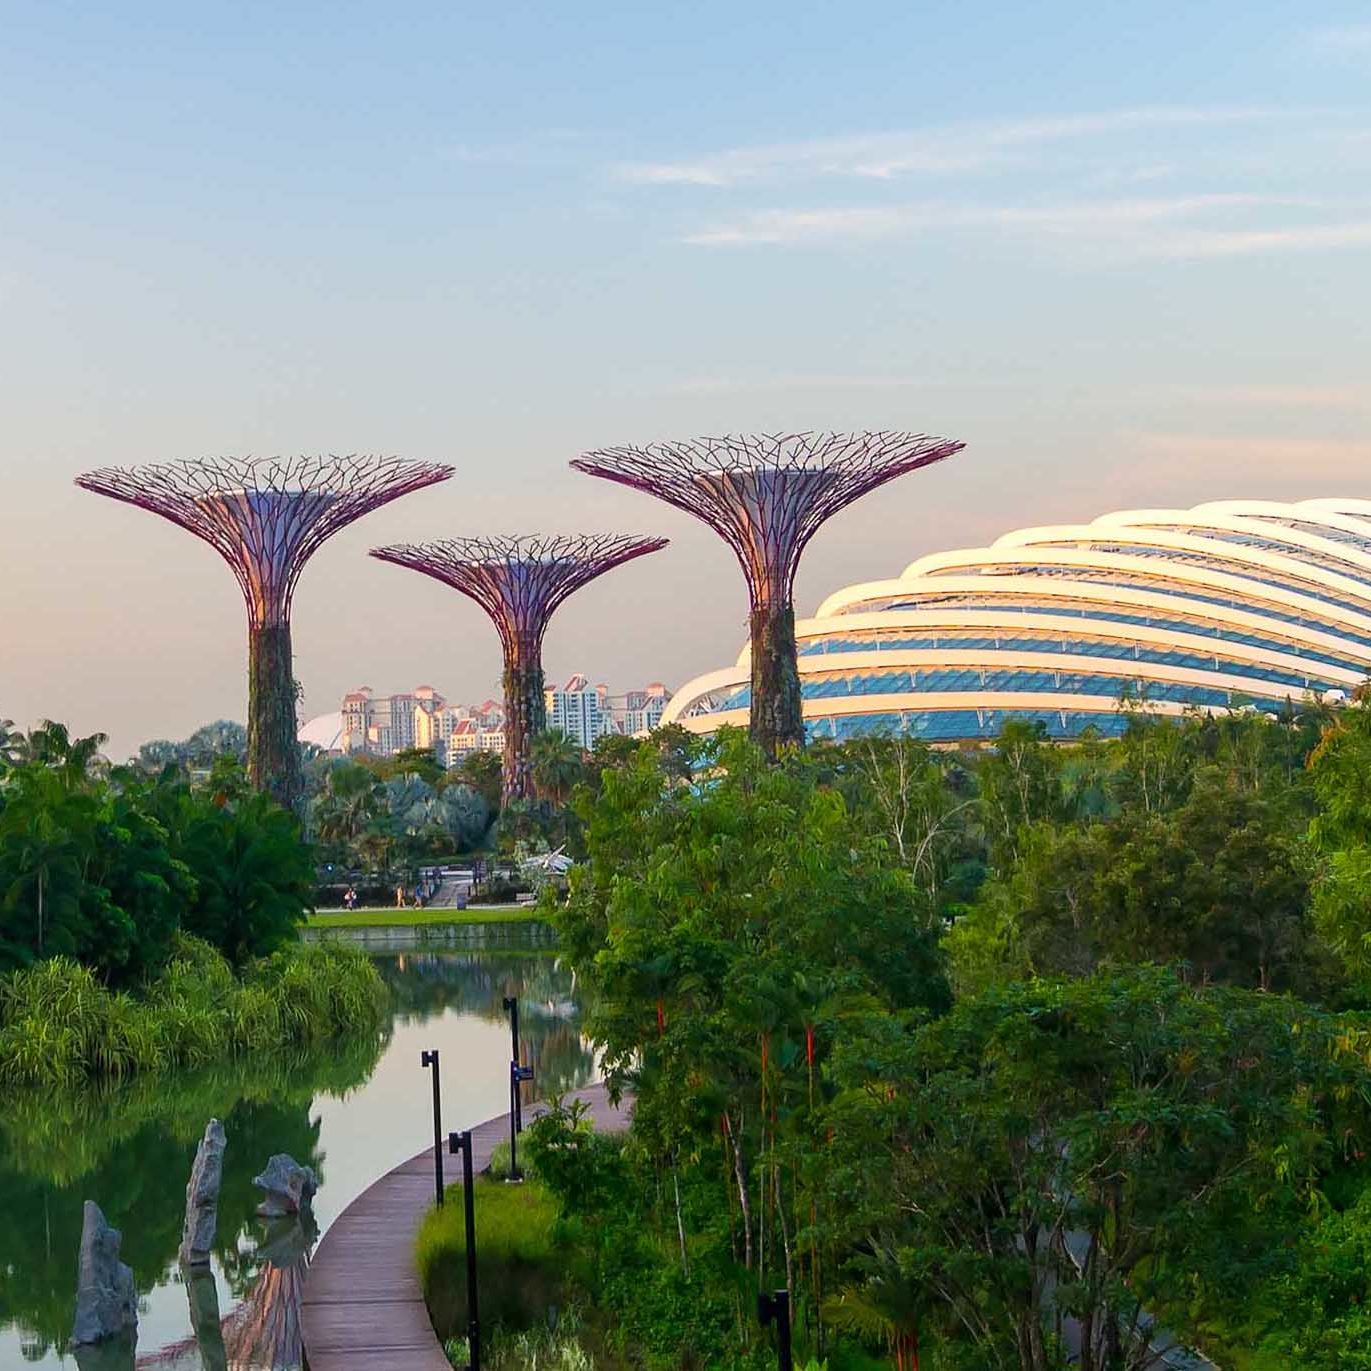 Singapore City, Singapore - June 23, 2014: Supertree Grove in the Garden by the Bay in Singapore.